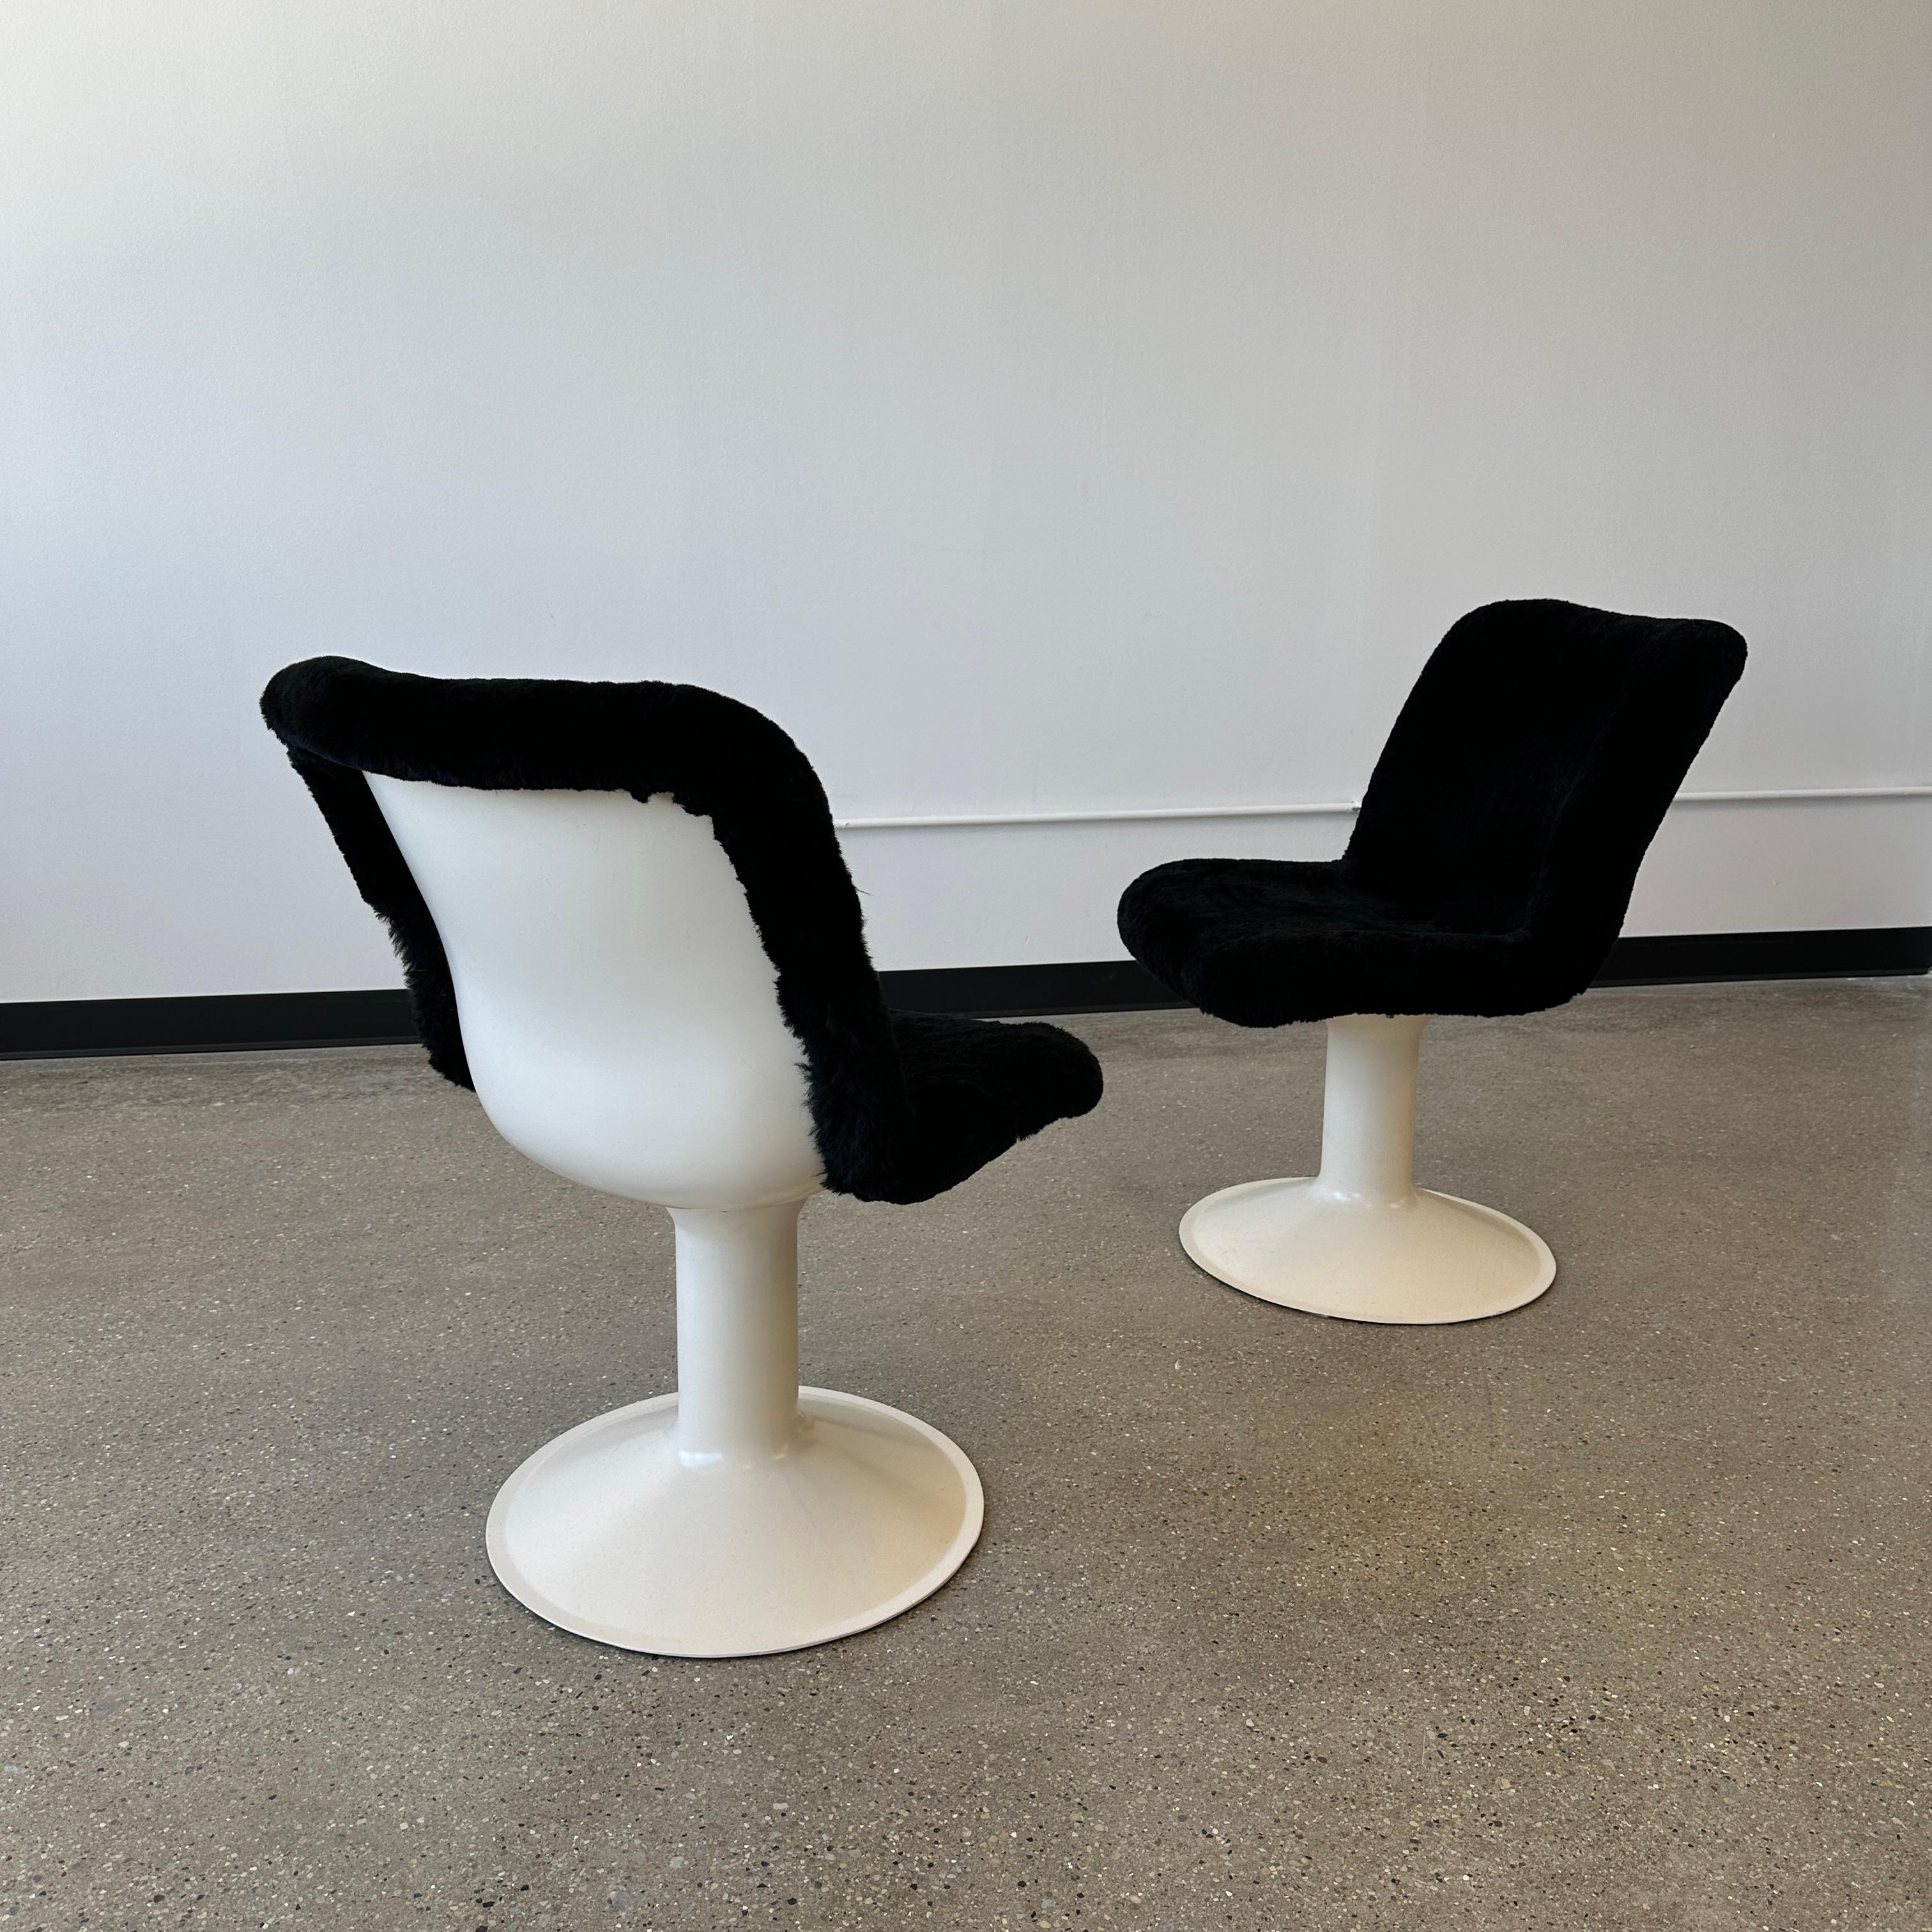 Yrjö Kukkapuro Chairs in Shearling In Good Condition For Sale In Chicago, IL